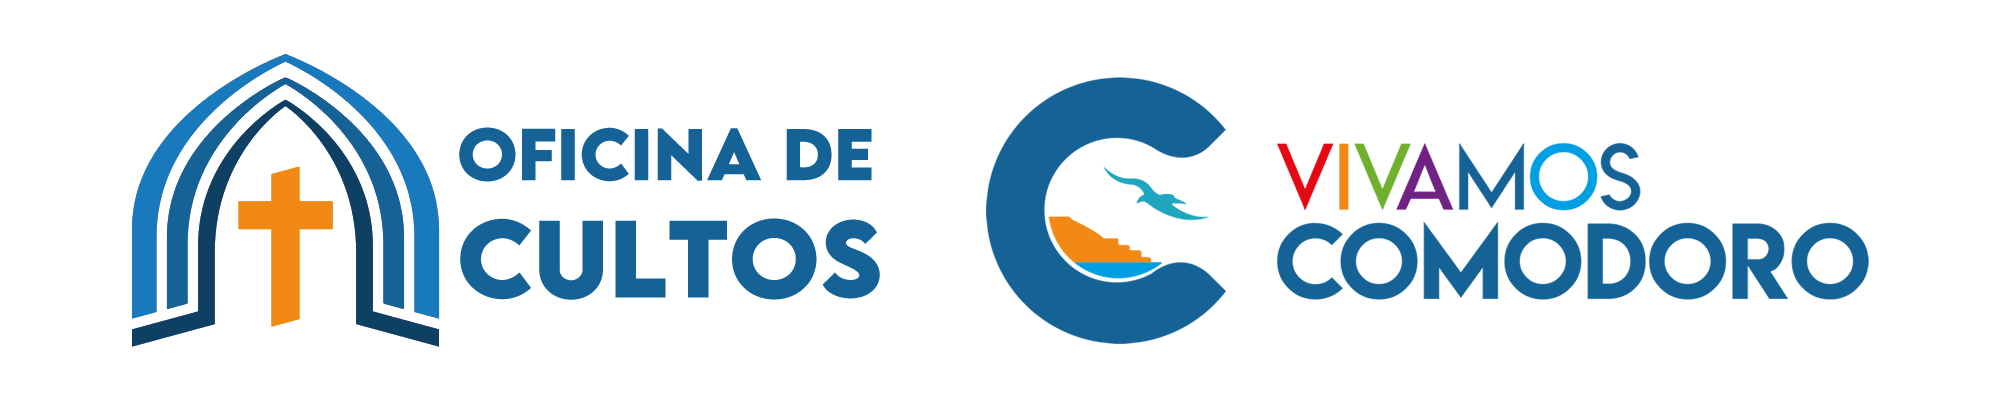 logo-color.fw.png